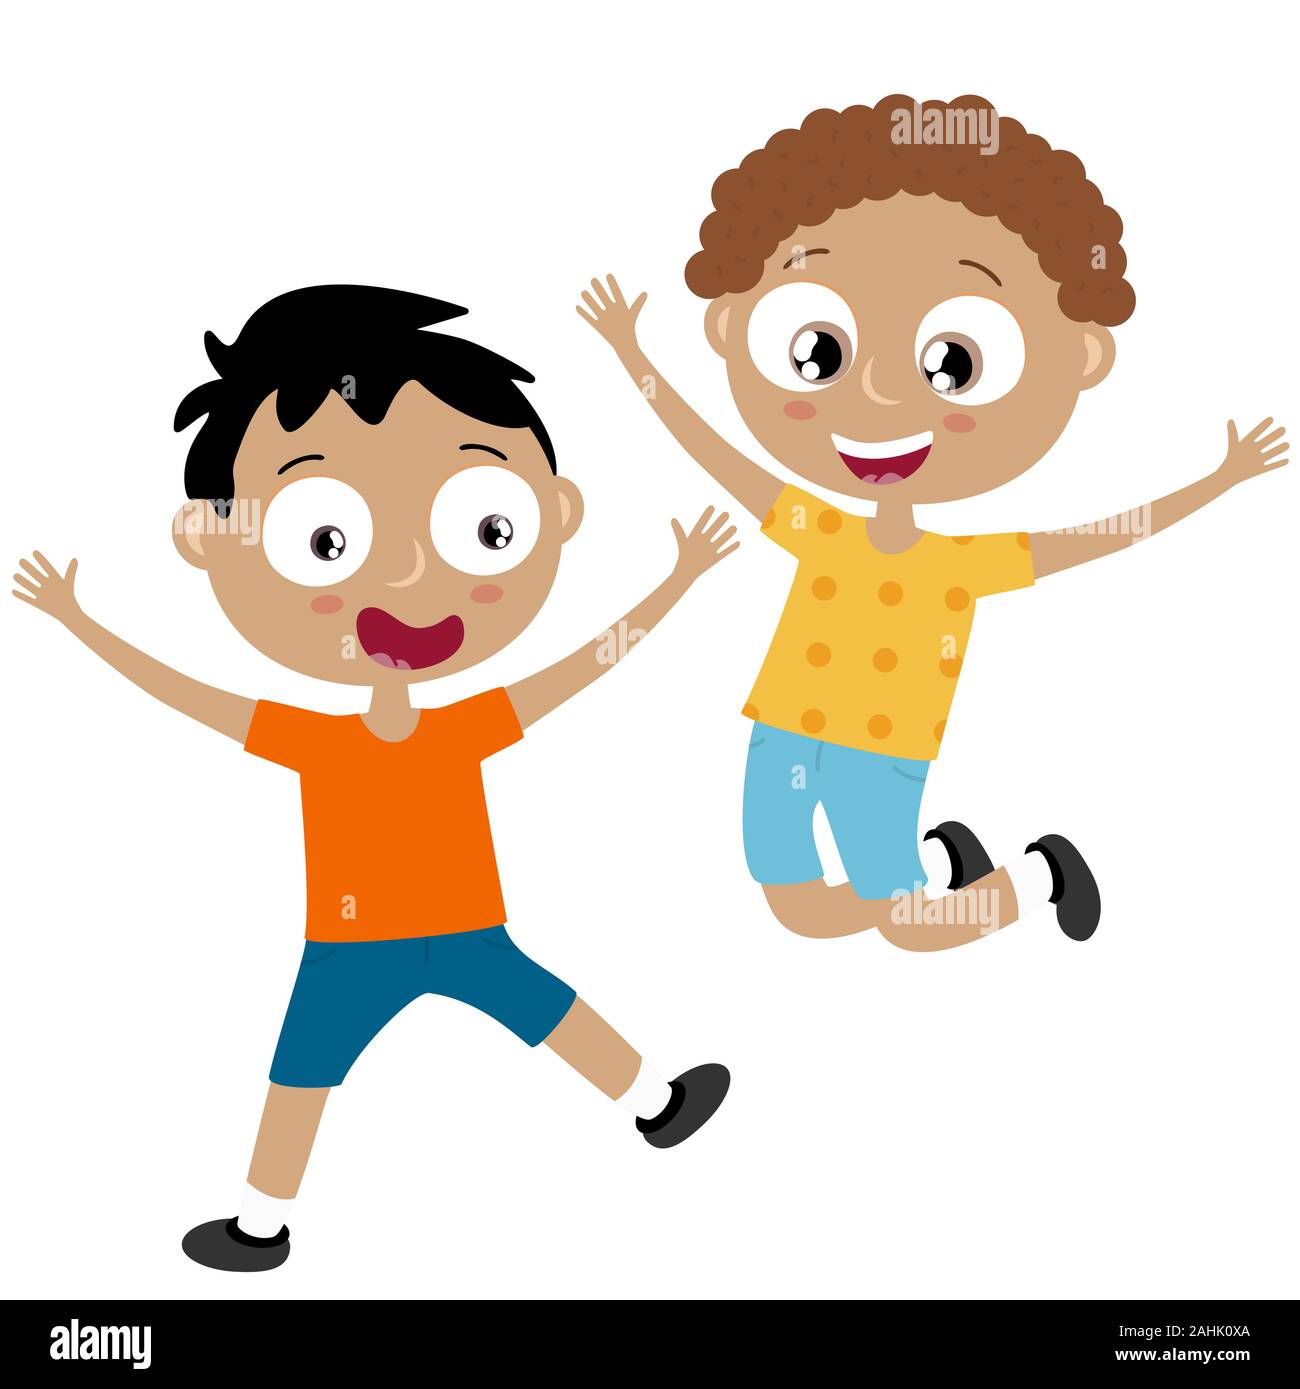 EPS10 vector file showing happy young kids with different skin colors, boys laughing, hopping,  playing and having fun together Stock Vector